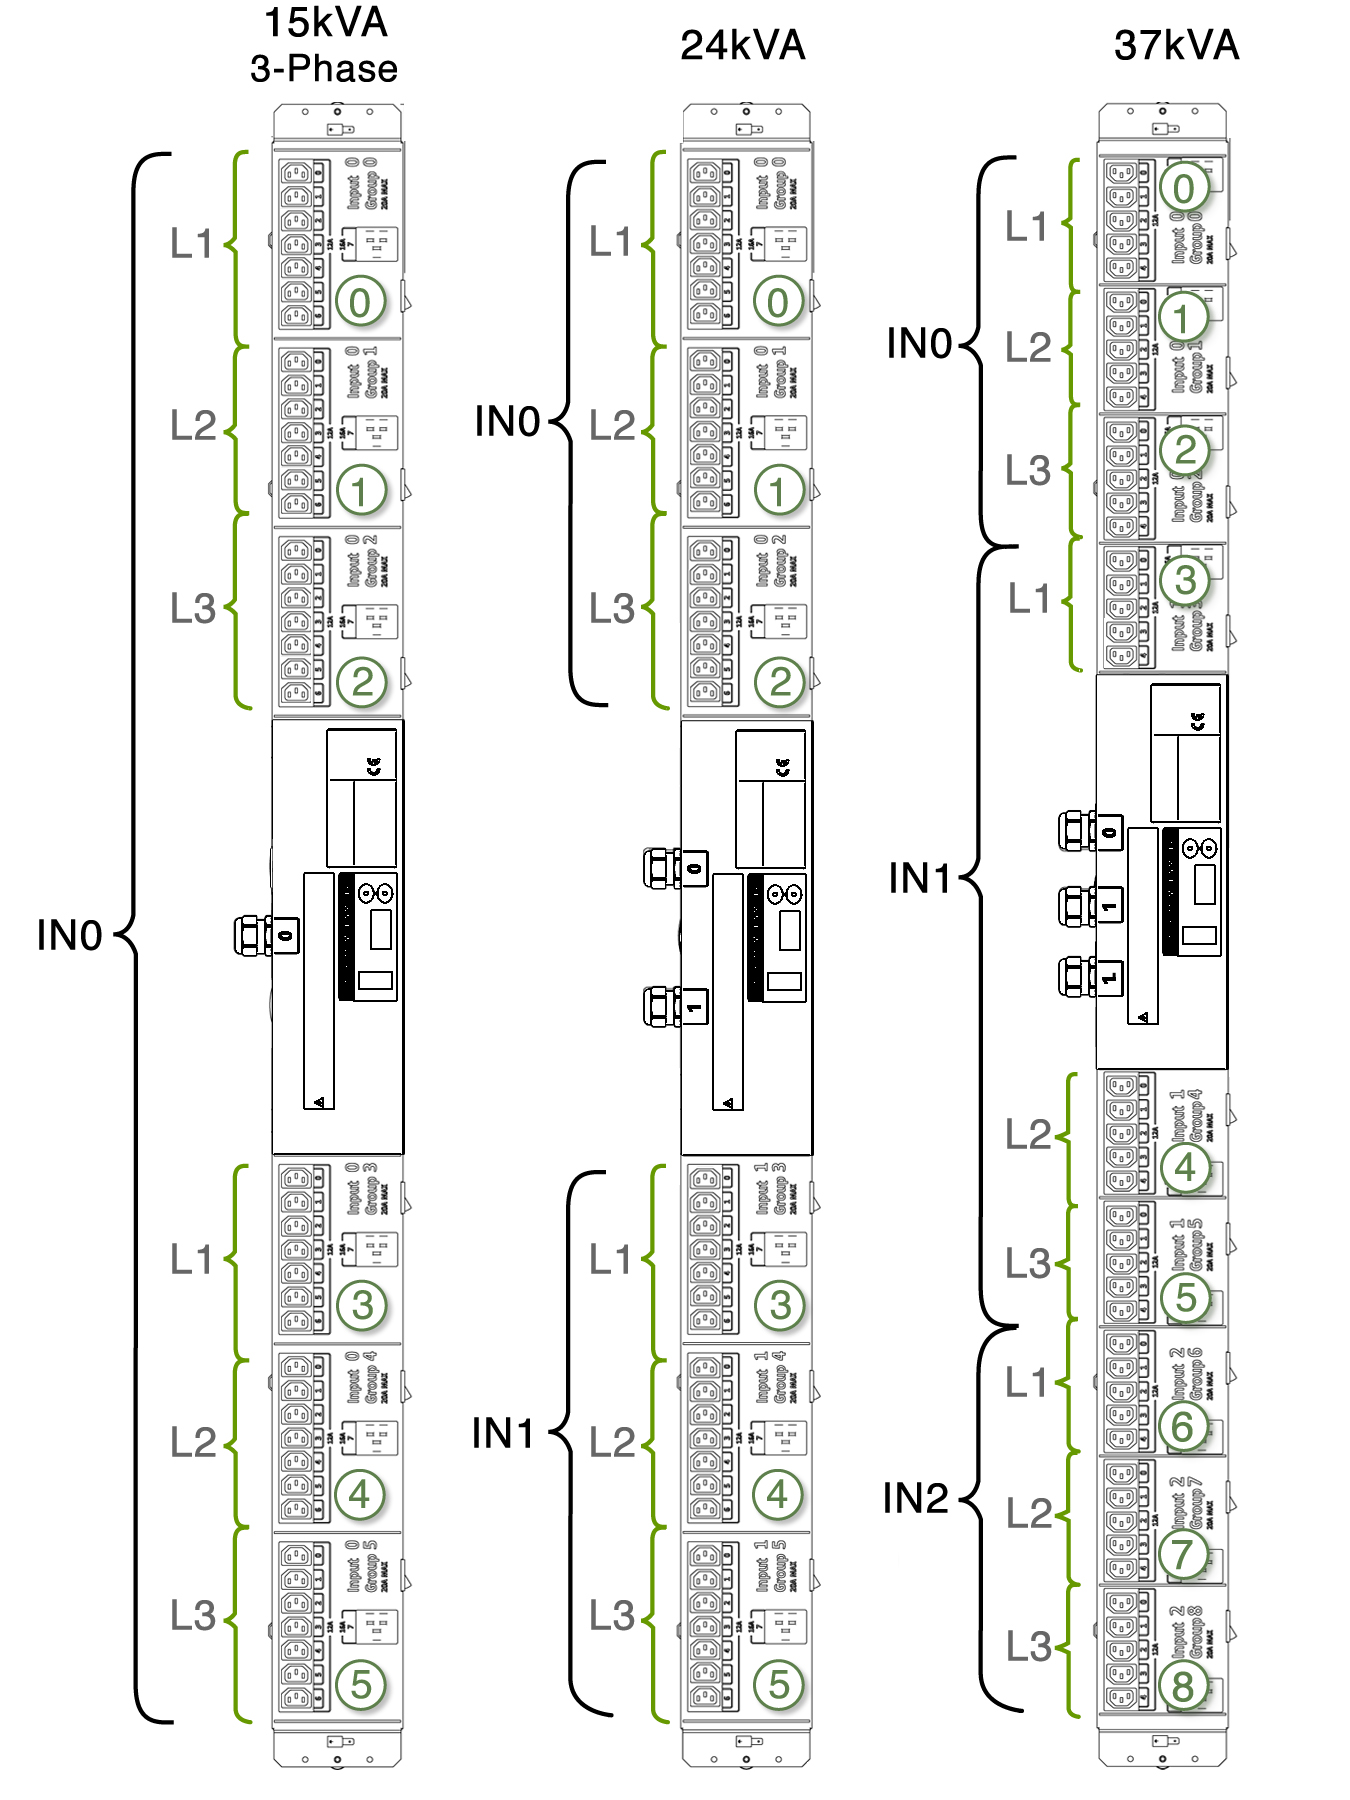 image:Figure showing the relationship between the metering unit inputs                             and the 3-phase PDU outlet groups.